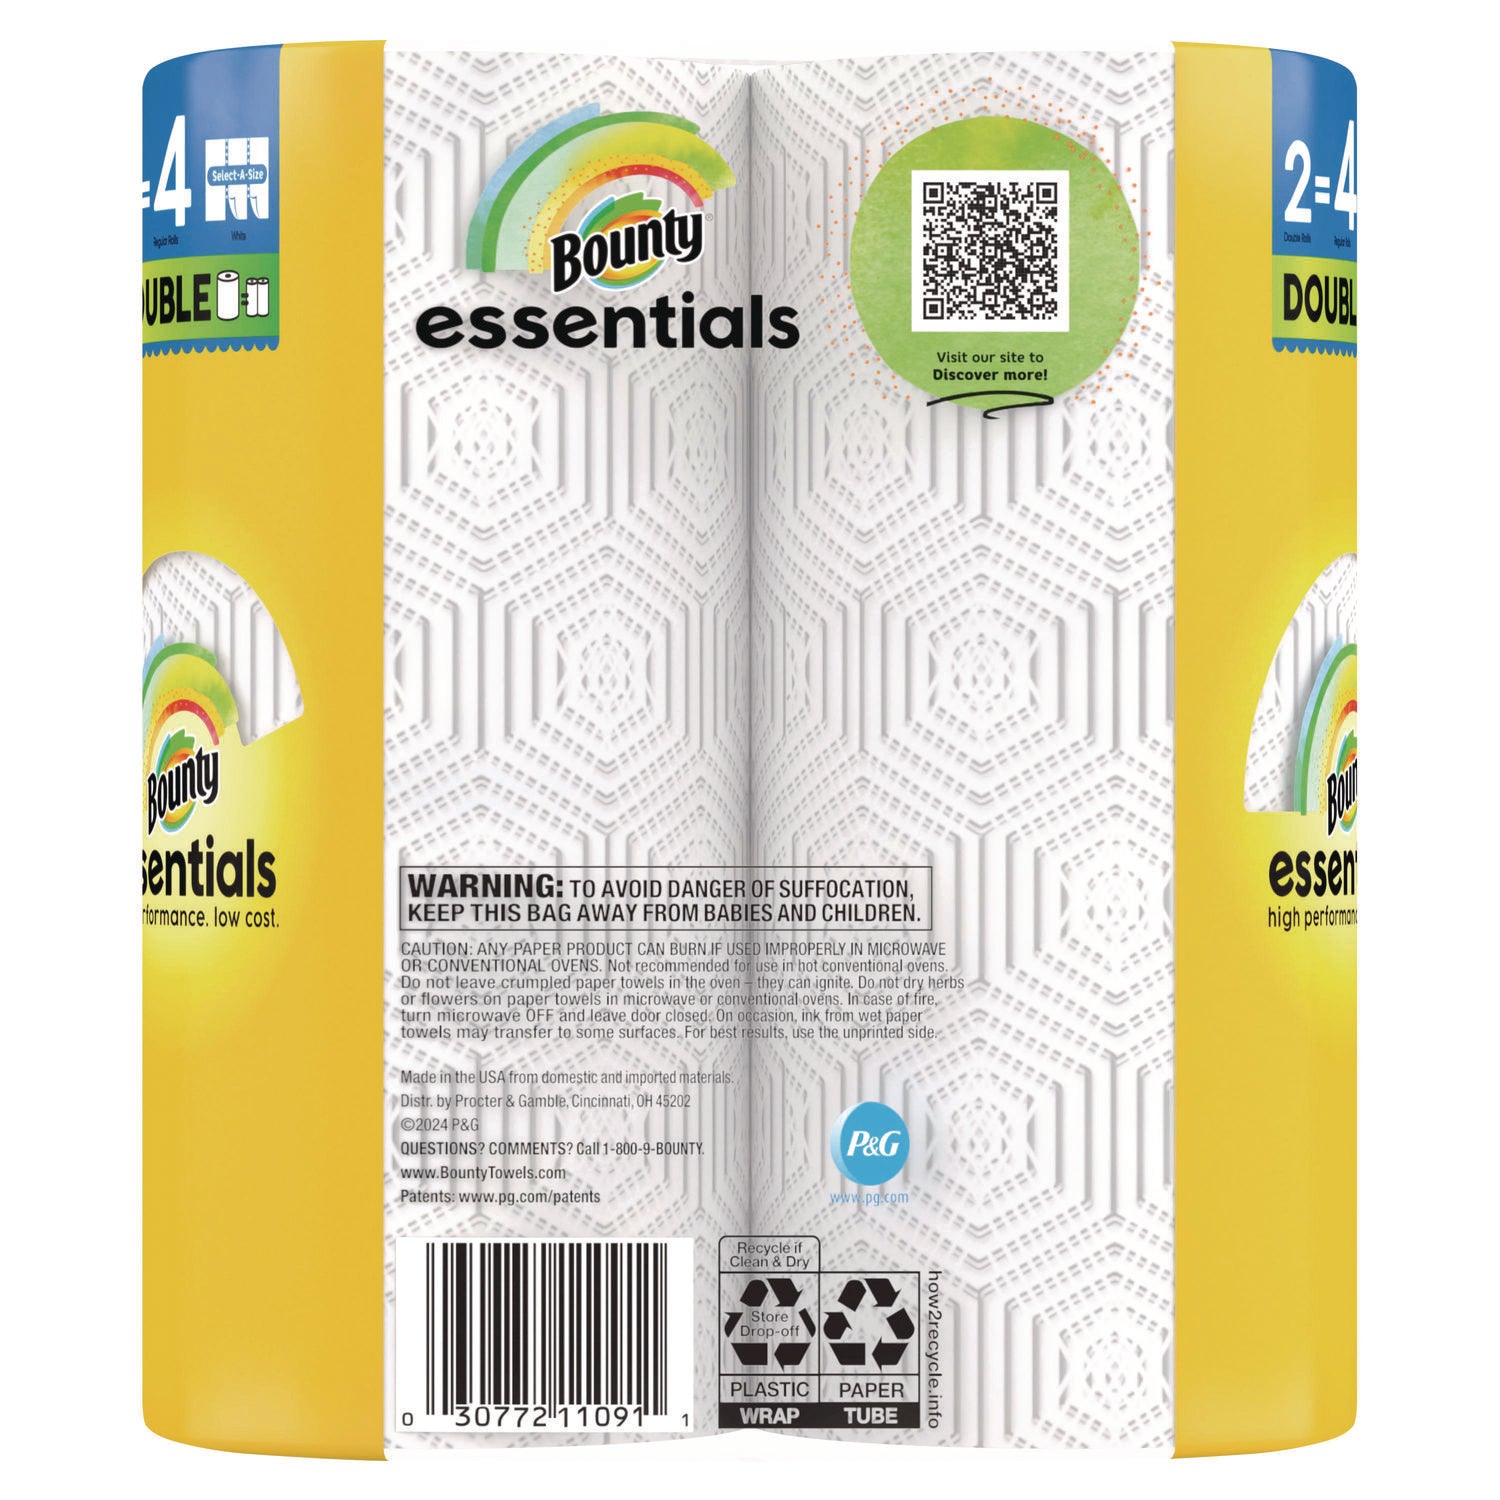 essentials-select-a-size-kitchen-roll-paper-towels-2-ply-white-108-sheets-roll-2-pack-8-packs-carton_pgc14019 - 4